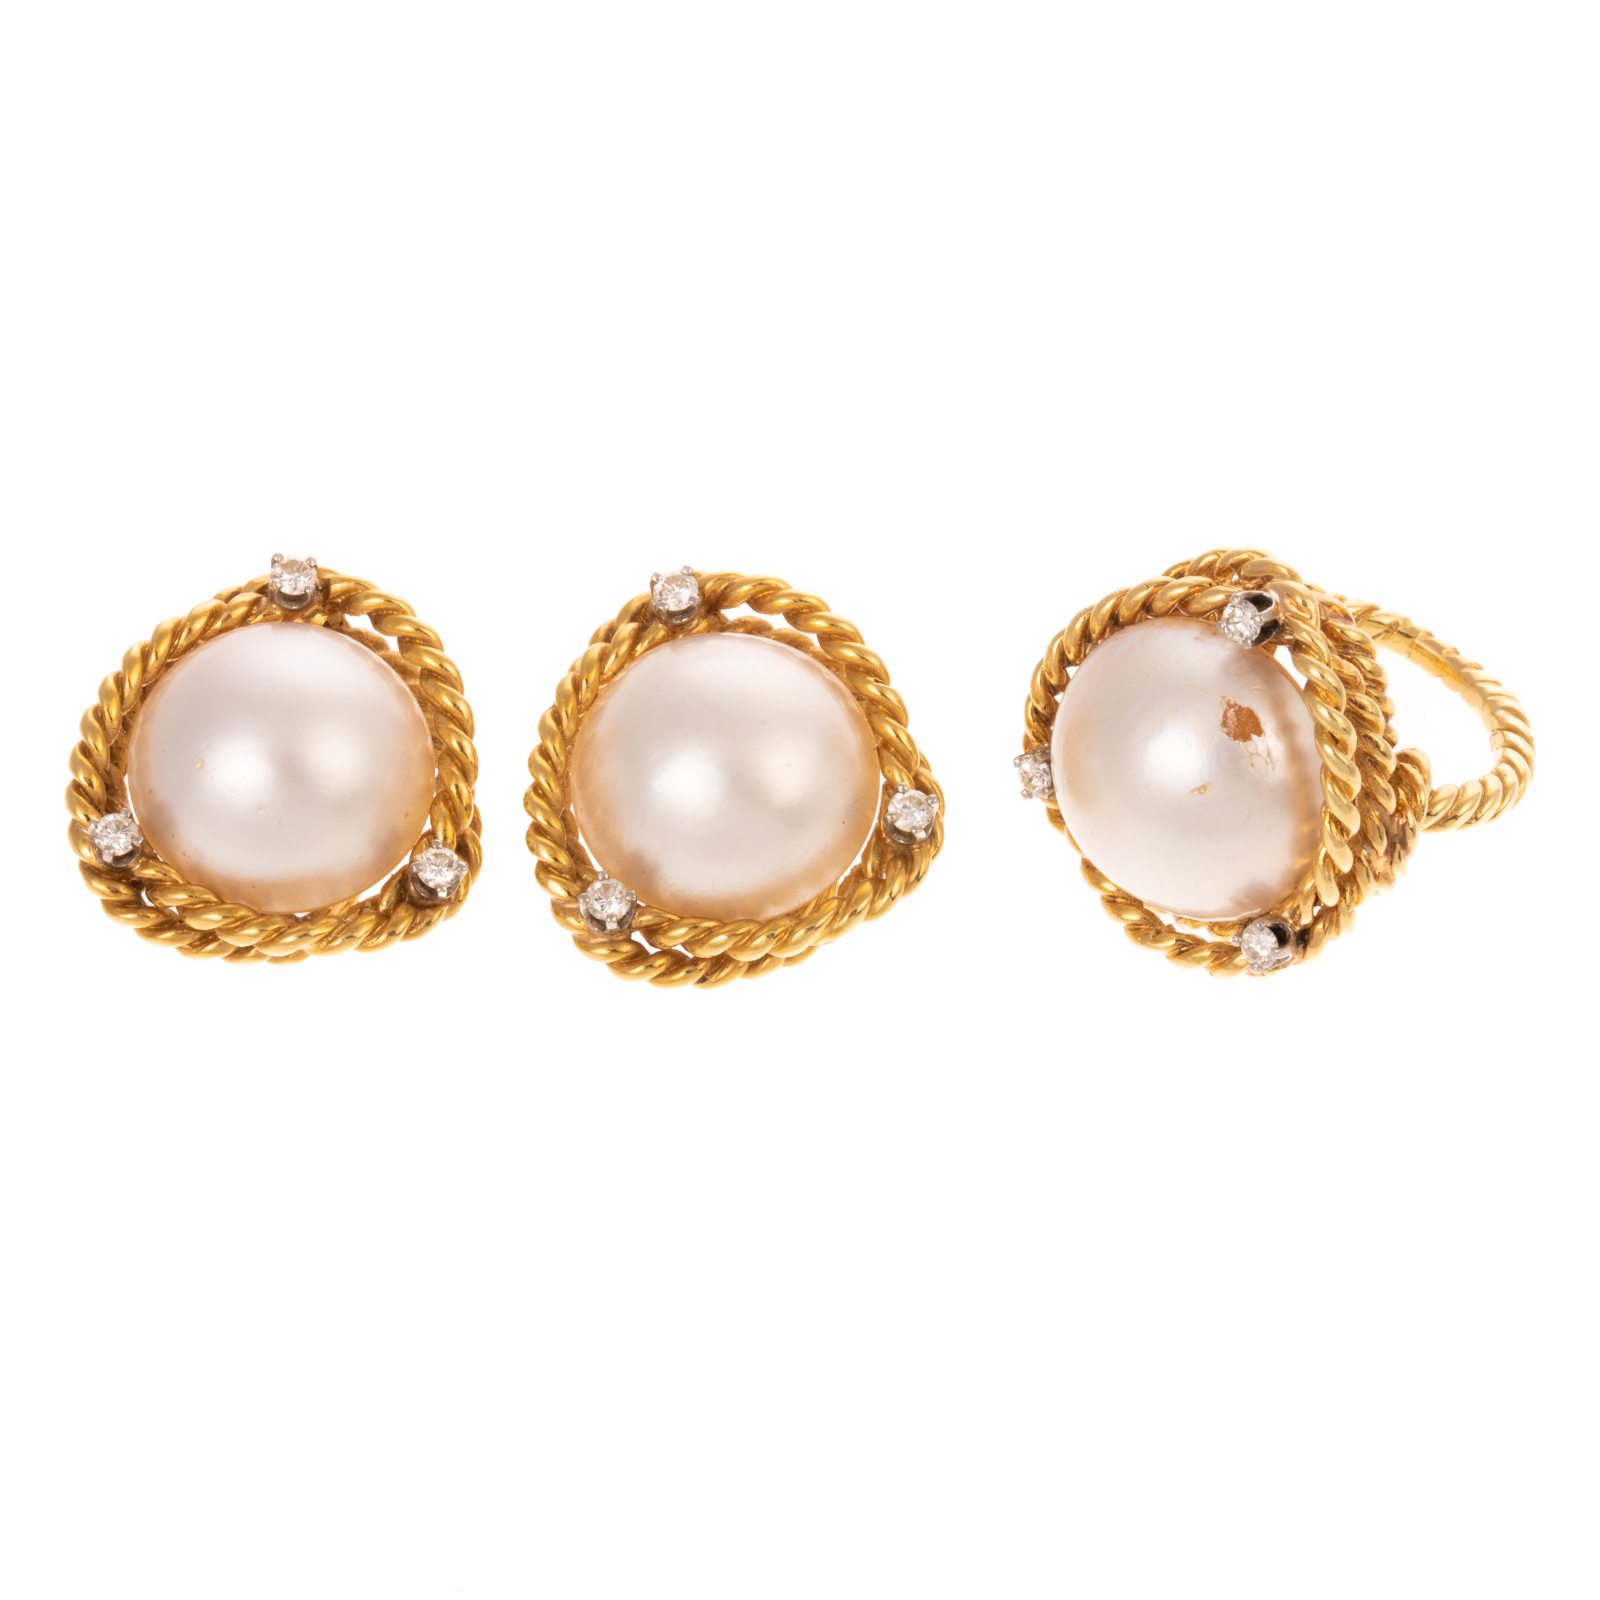 A MABE PEARL RING EARRINGS IN 338549